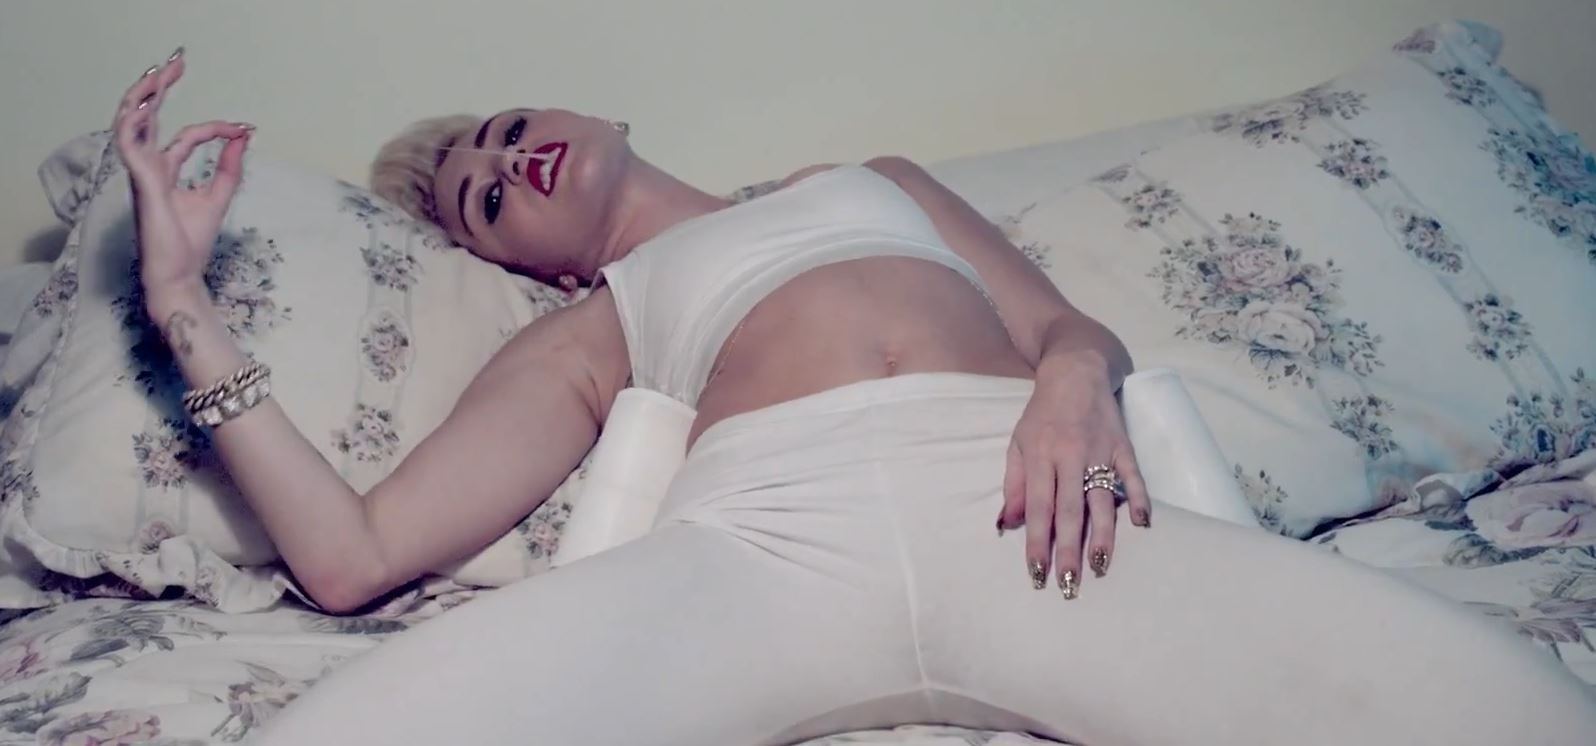 miley-cyrus-cant stop4.jpg.